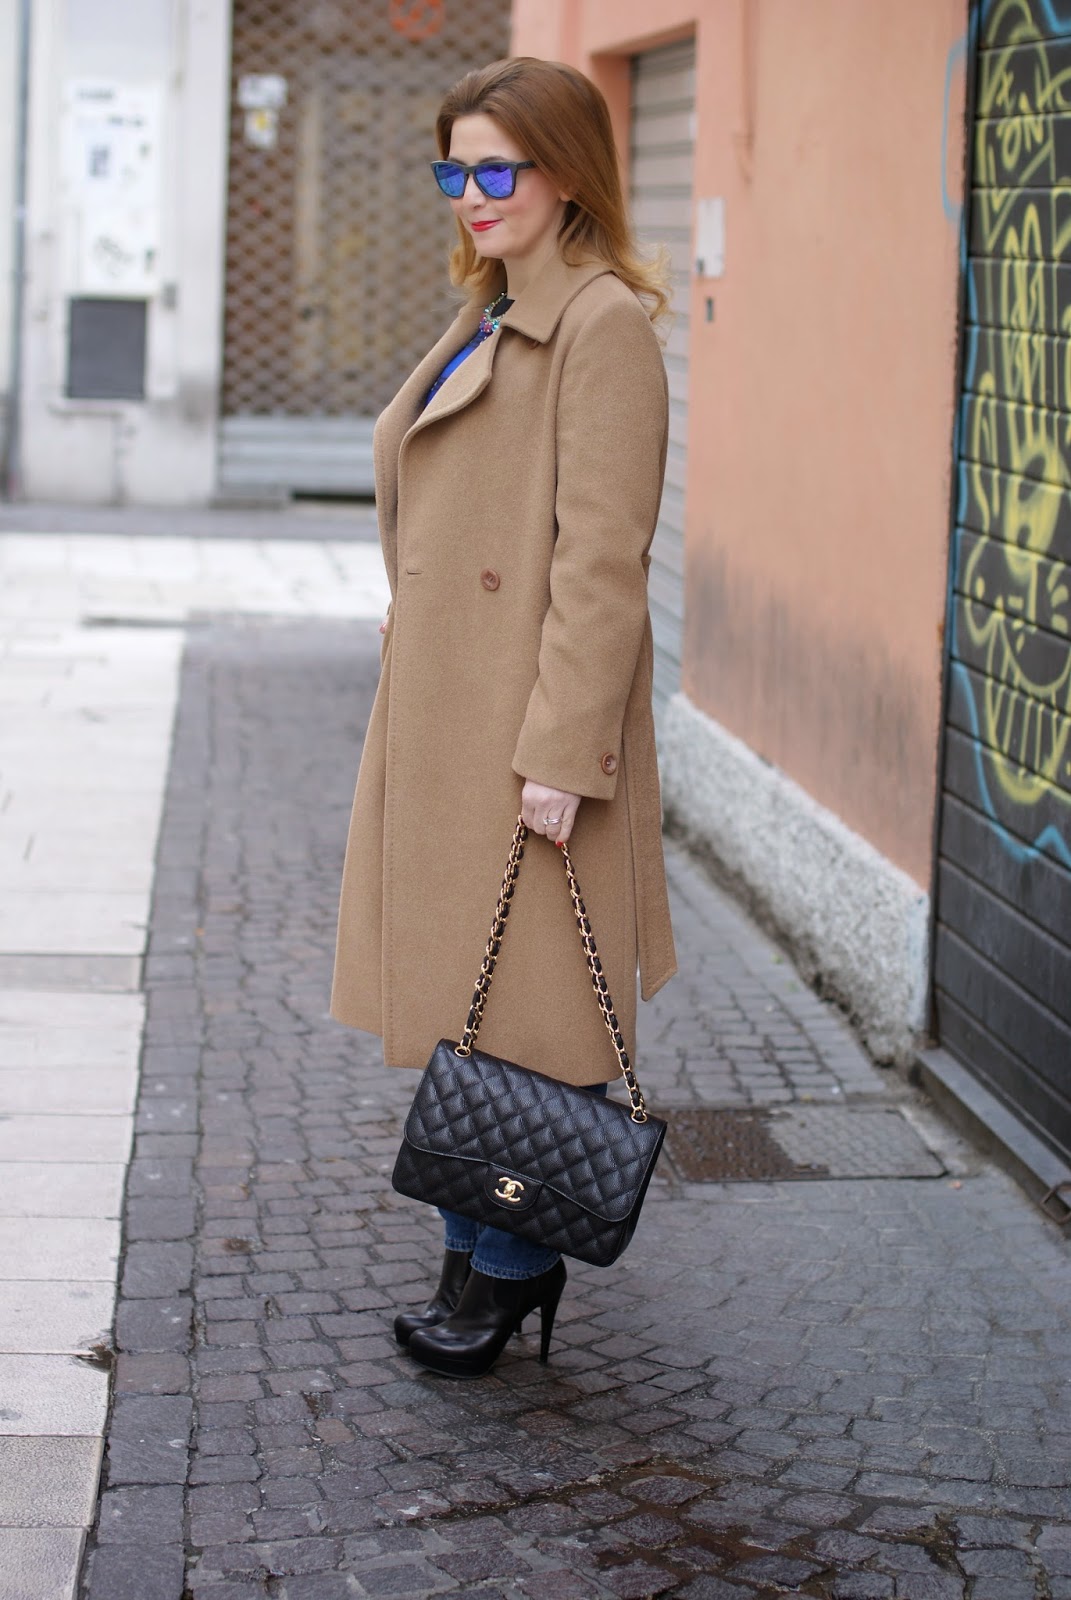 Max Mara camel belted wool coat and Chanel 2.55 classic flap bag on fashion blogger Vale on Fashion and Cookies fashion blog